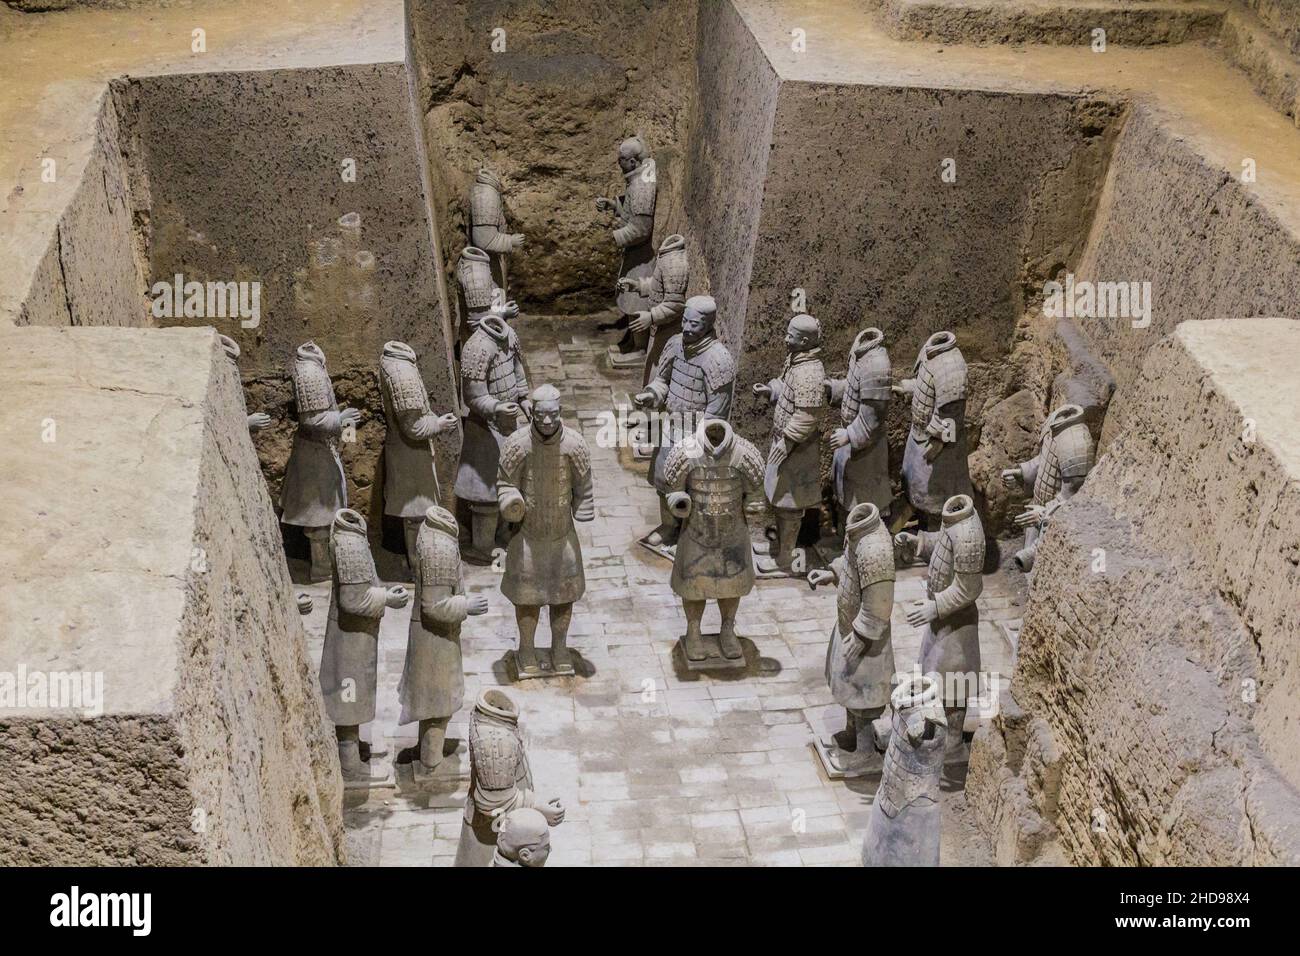 Sculptures in the Pit 3 of the Army of Terracotta Warriors near Xi'an, Shaanxi province, China Stock Photo